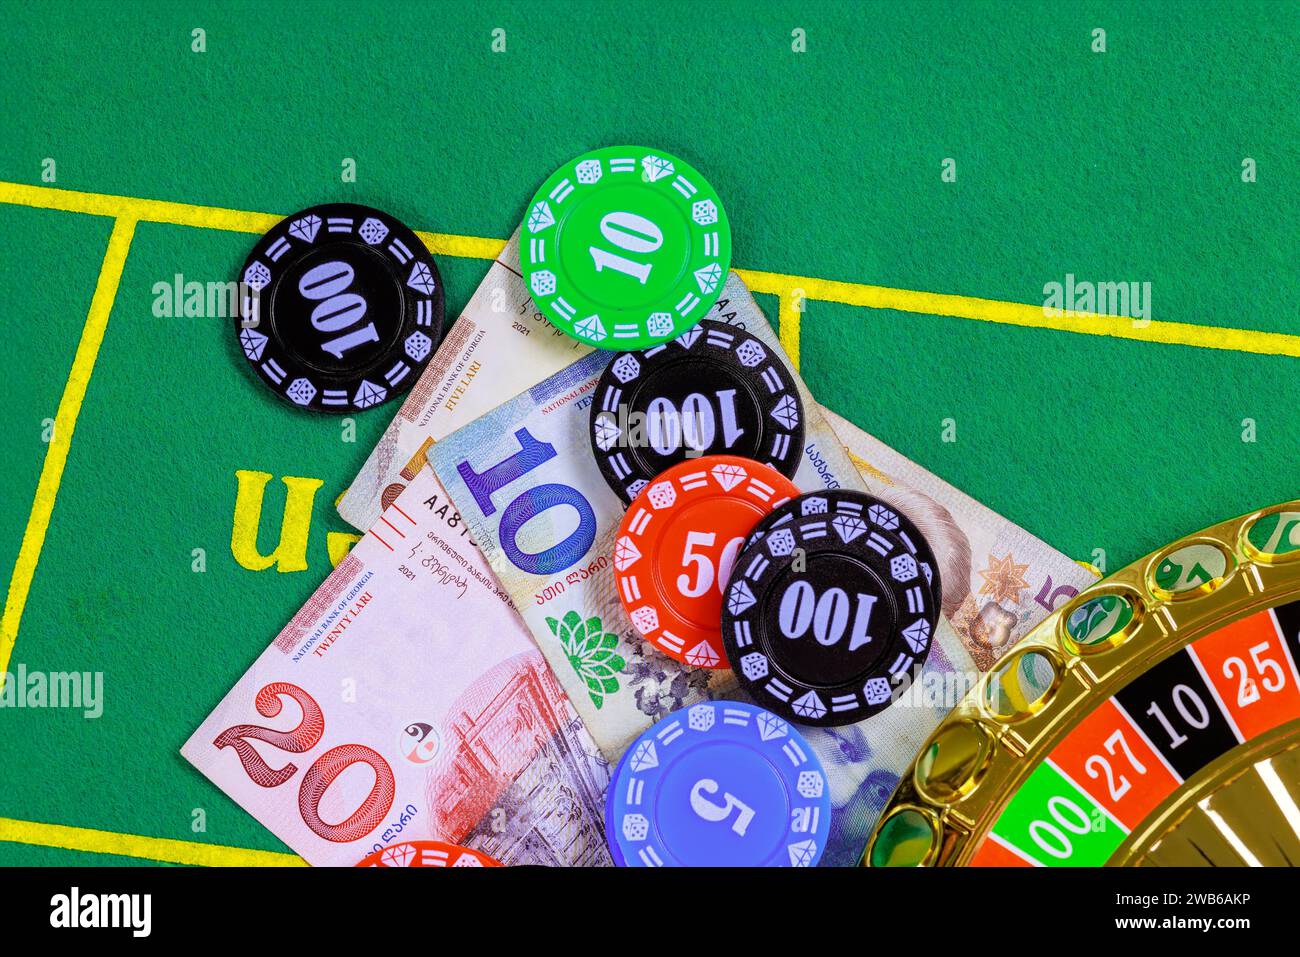 On green gaming table are roulette Georgian banknotes lari poker chips. Stock Photo